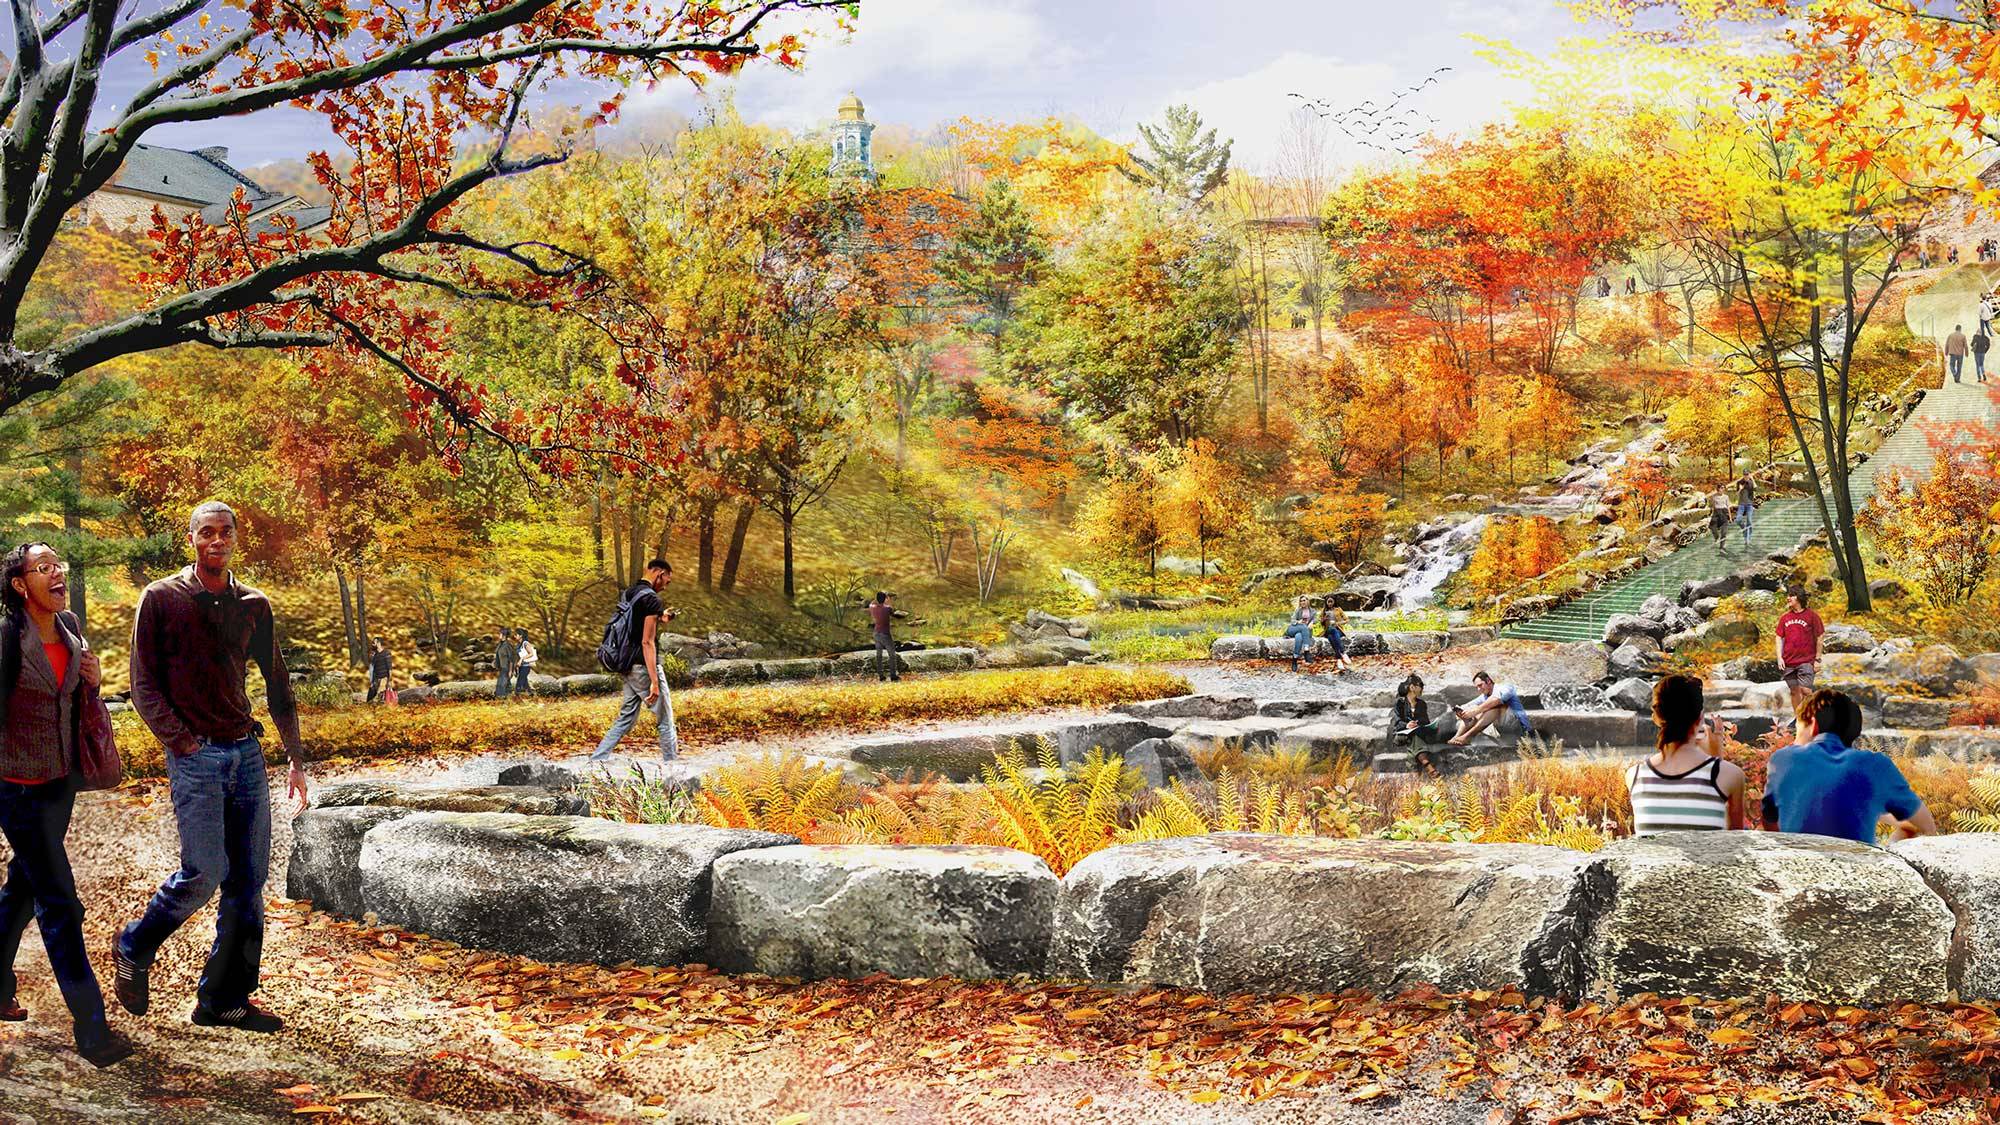 A concept rendering of what the bottom of the new campus glen will look like once complete. This view is of the area in between Ryan Studio and Dana Arts Center.